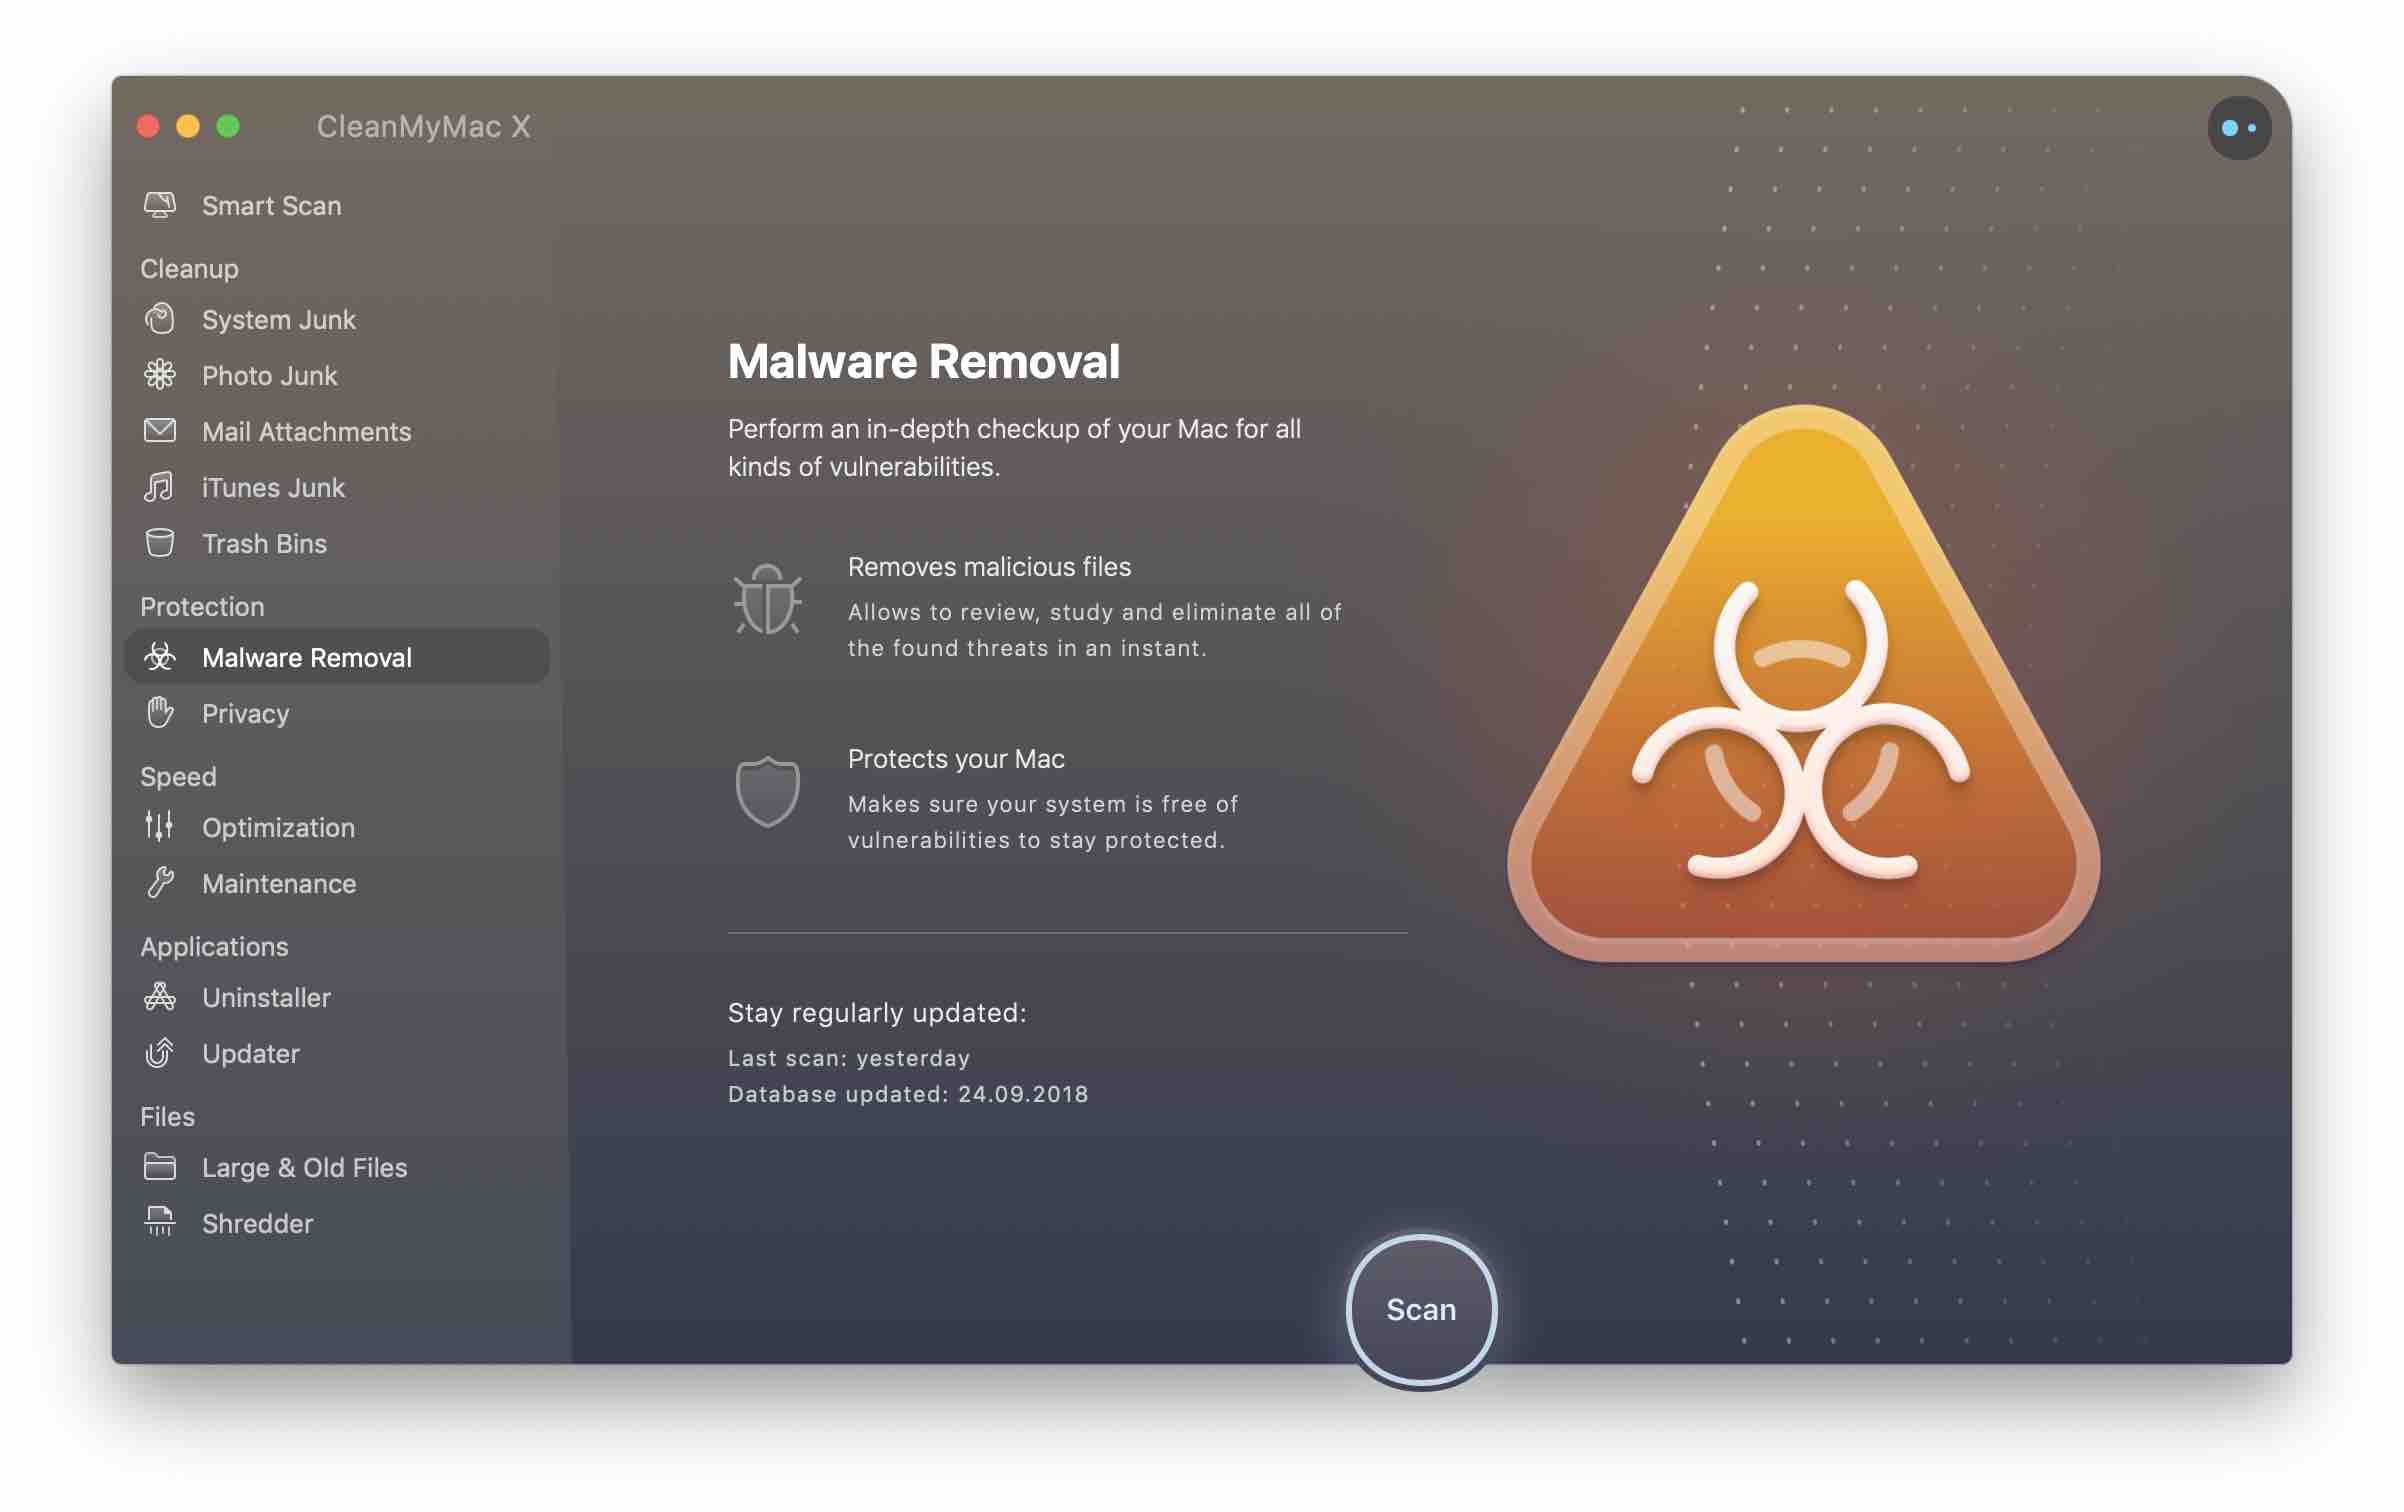 cleanmymac x - malware removal